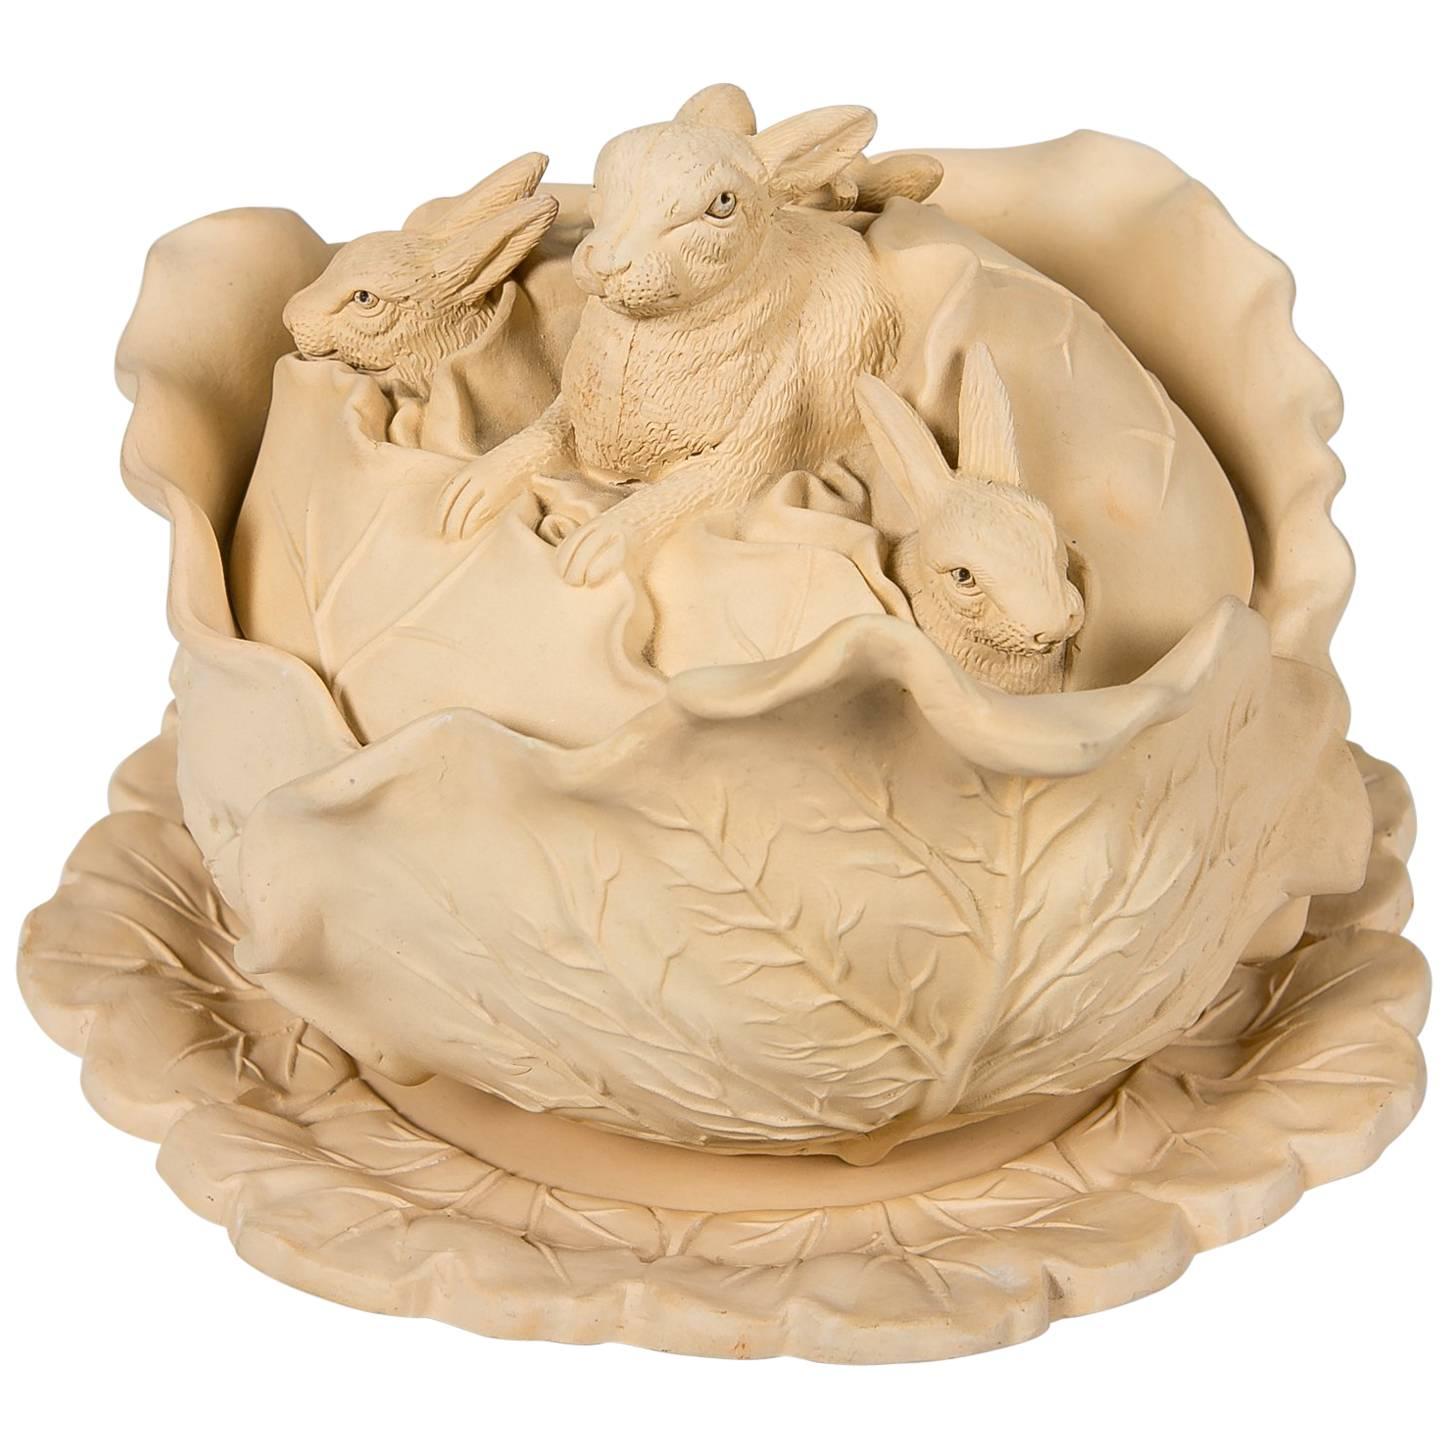  Game Pie Dish Decorated with Four Rabbits by William Schiller & Sons circa 1880